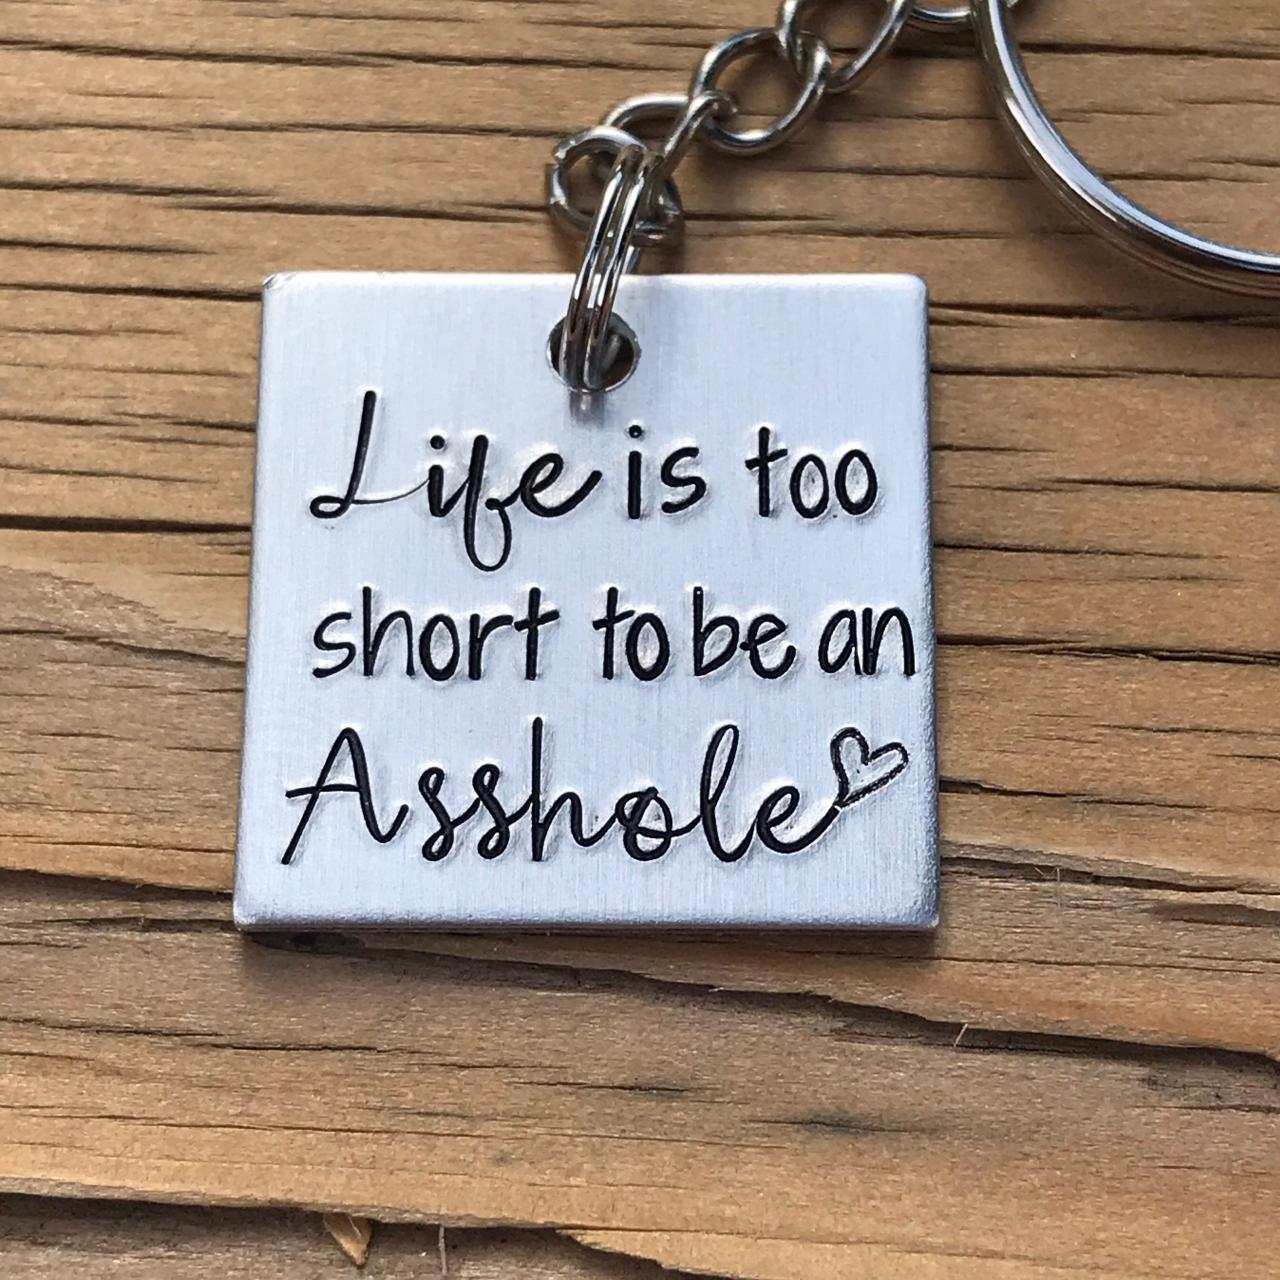 Life is too short to be an asshole, silver metal, lightweight son, daughter, thoughtful gift, keychain, hand stamped metal, husband, wife.